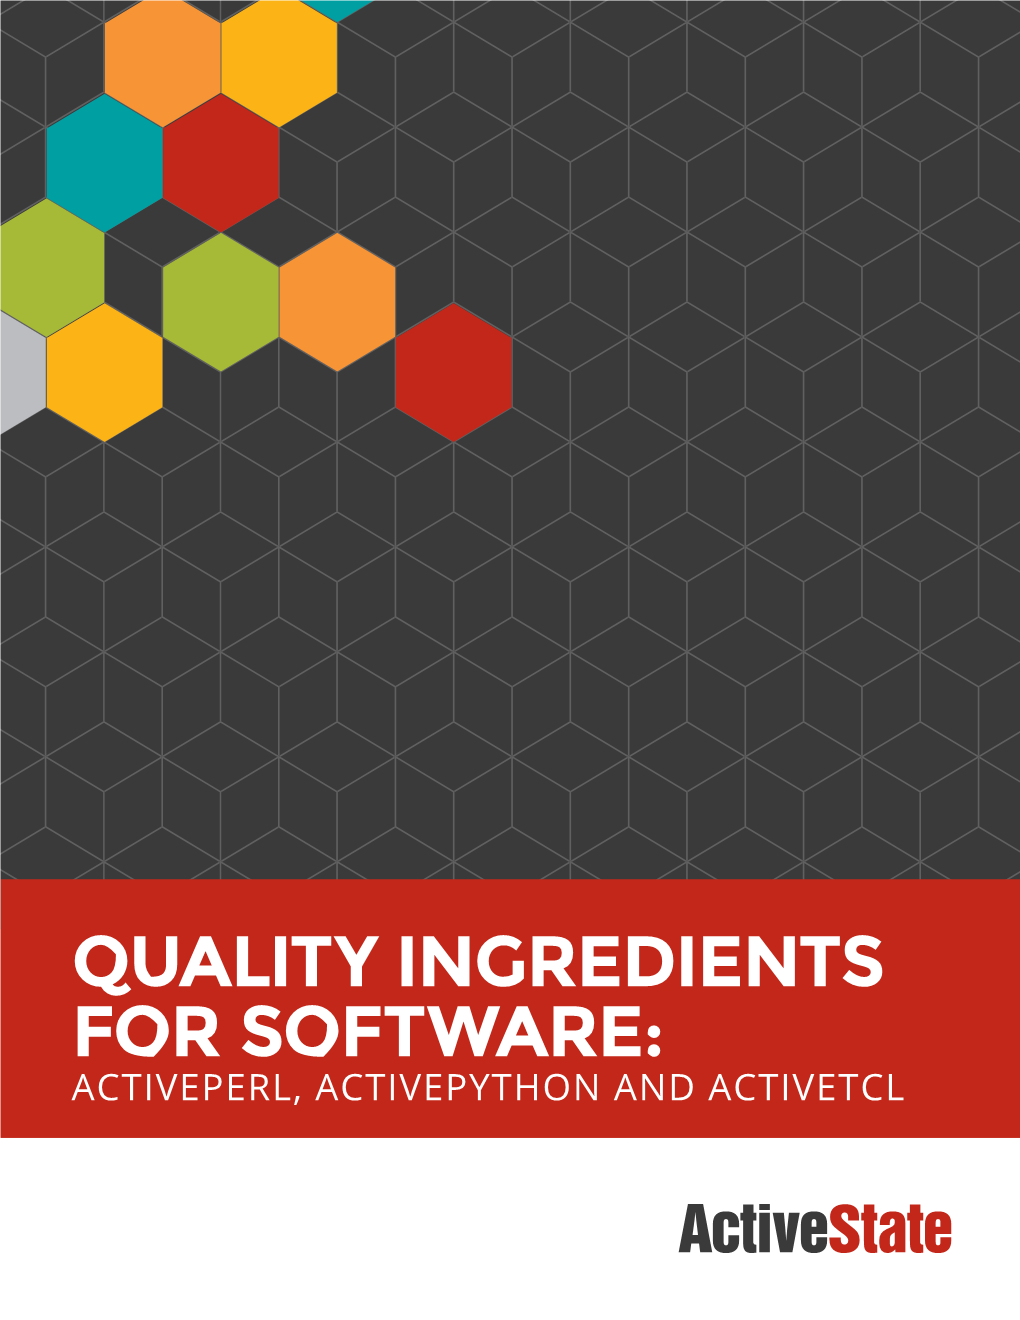 Quality Ingredients for Software: Activeperl, Activepython and Activetcl Quality Ingredients for Software